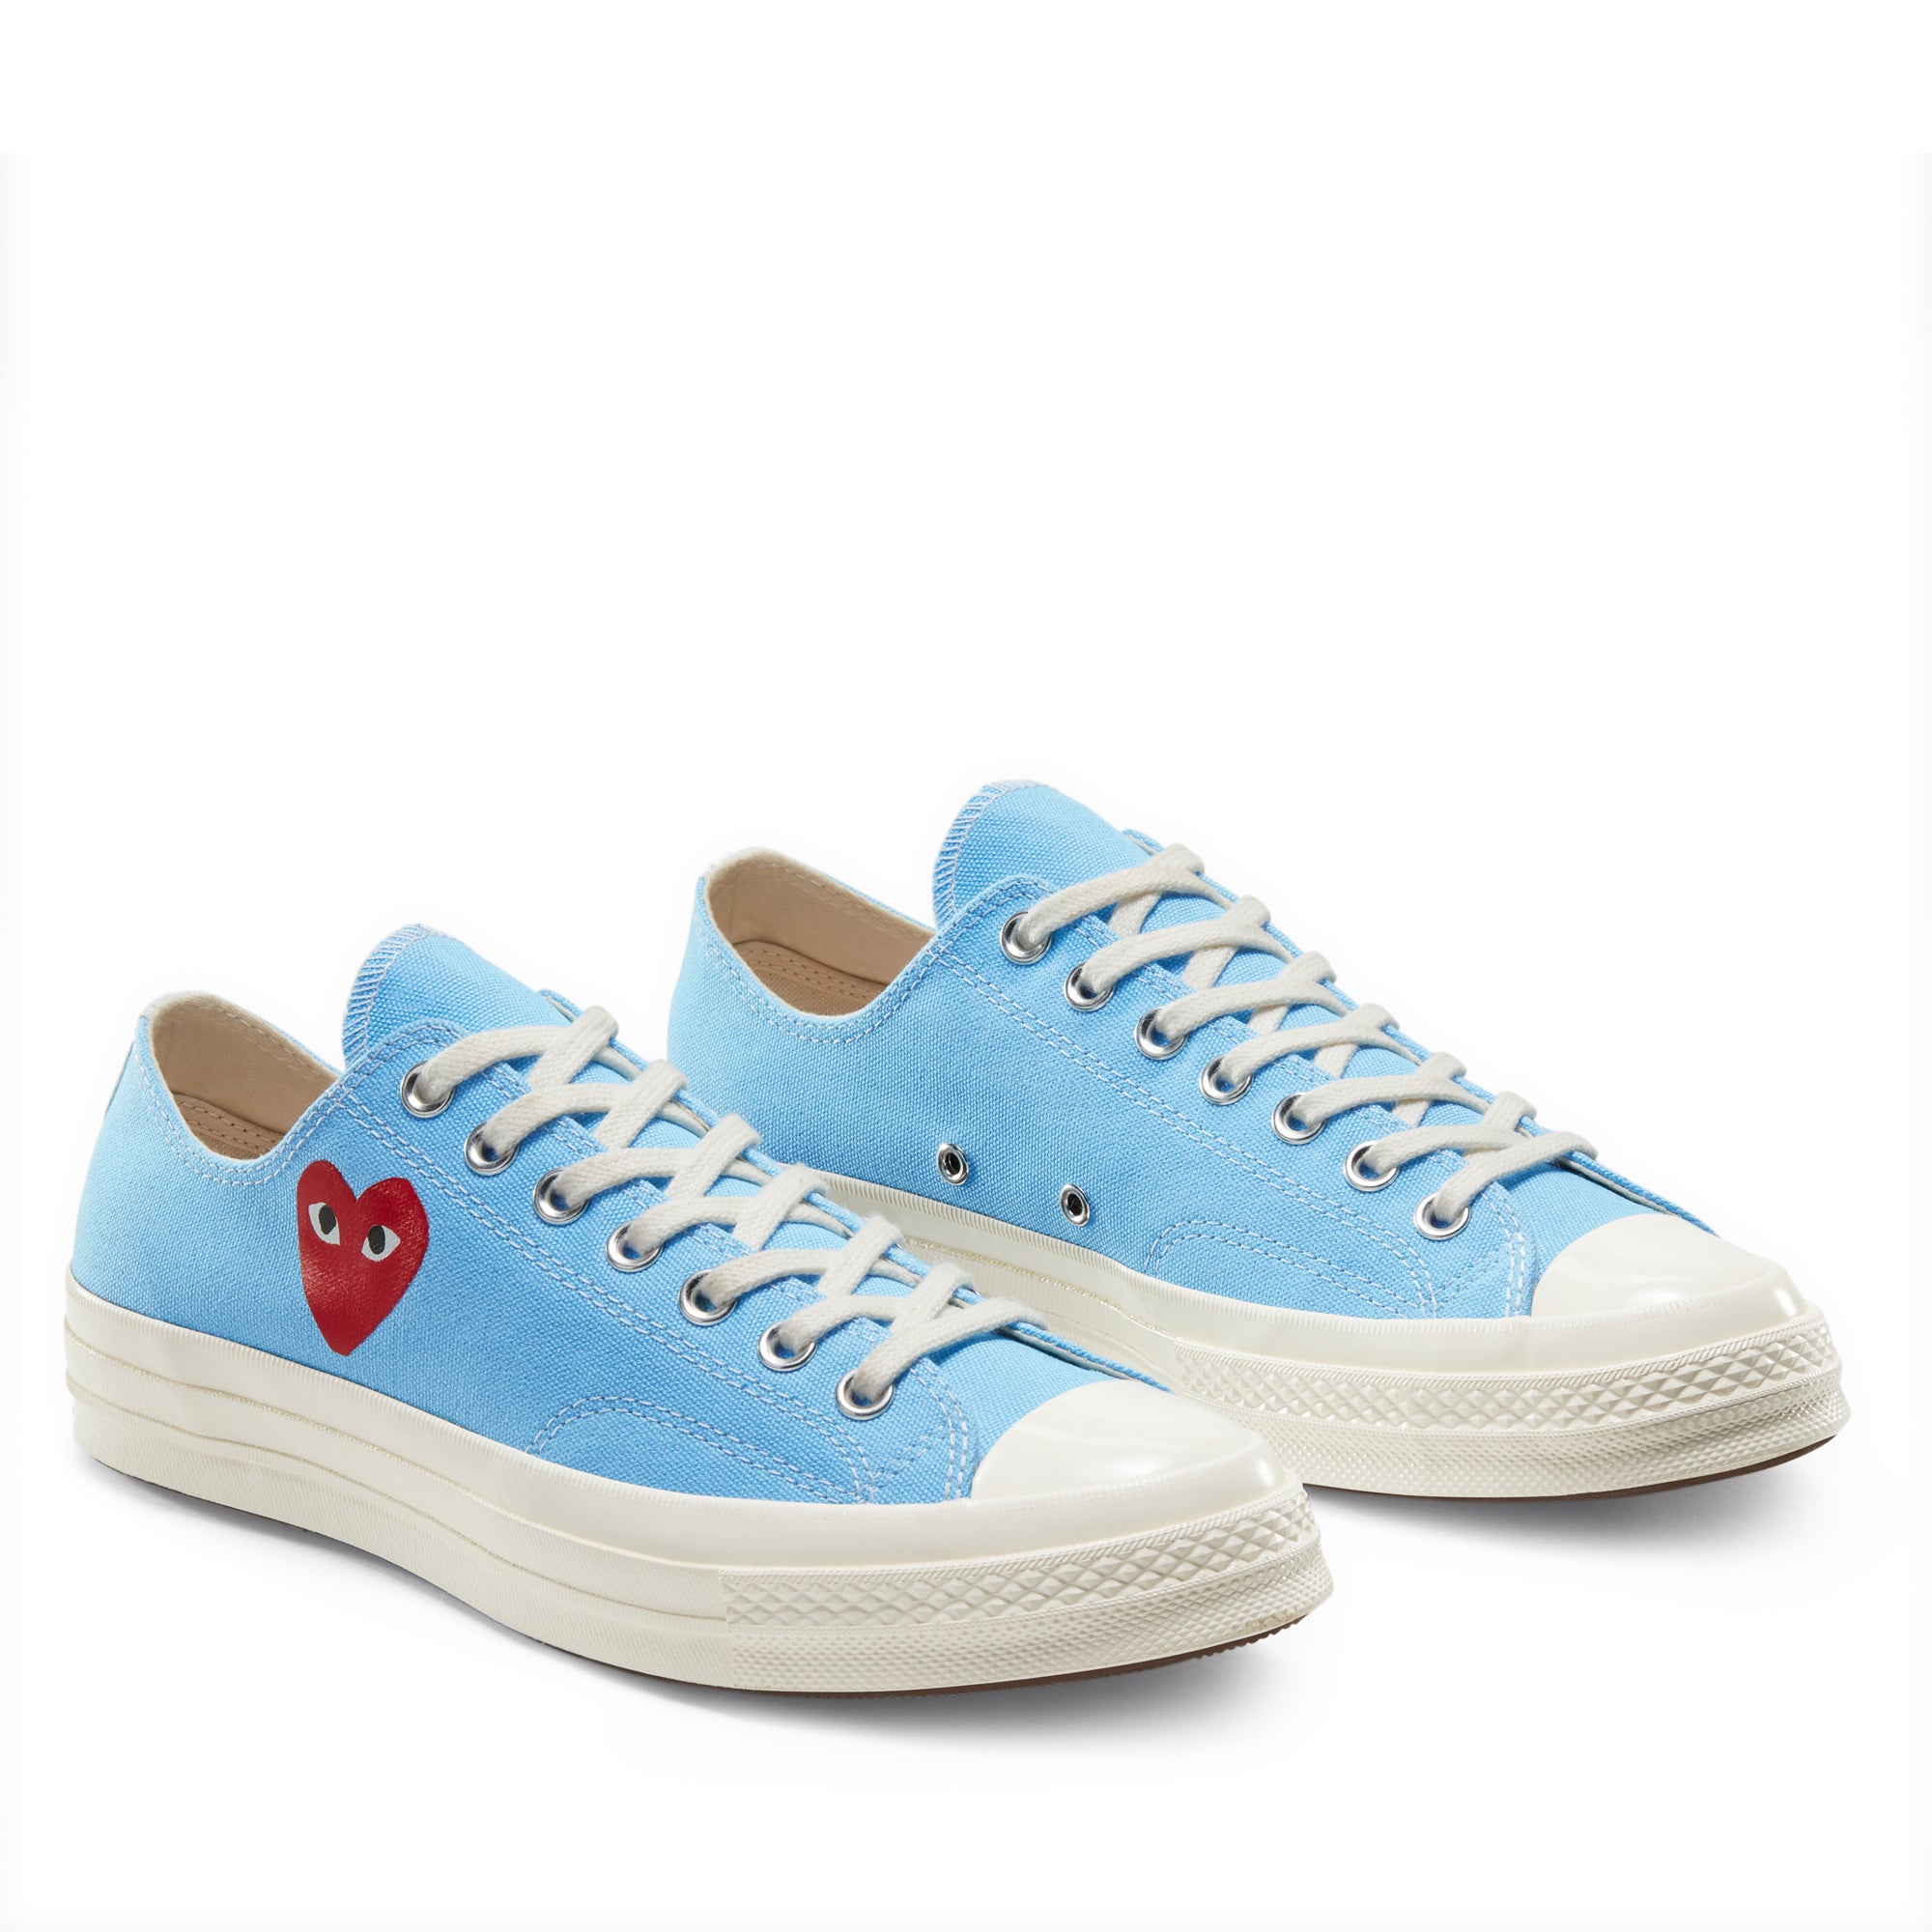 Play Converse - Red Heart Chuck ’70 Low Sneakers view 3